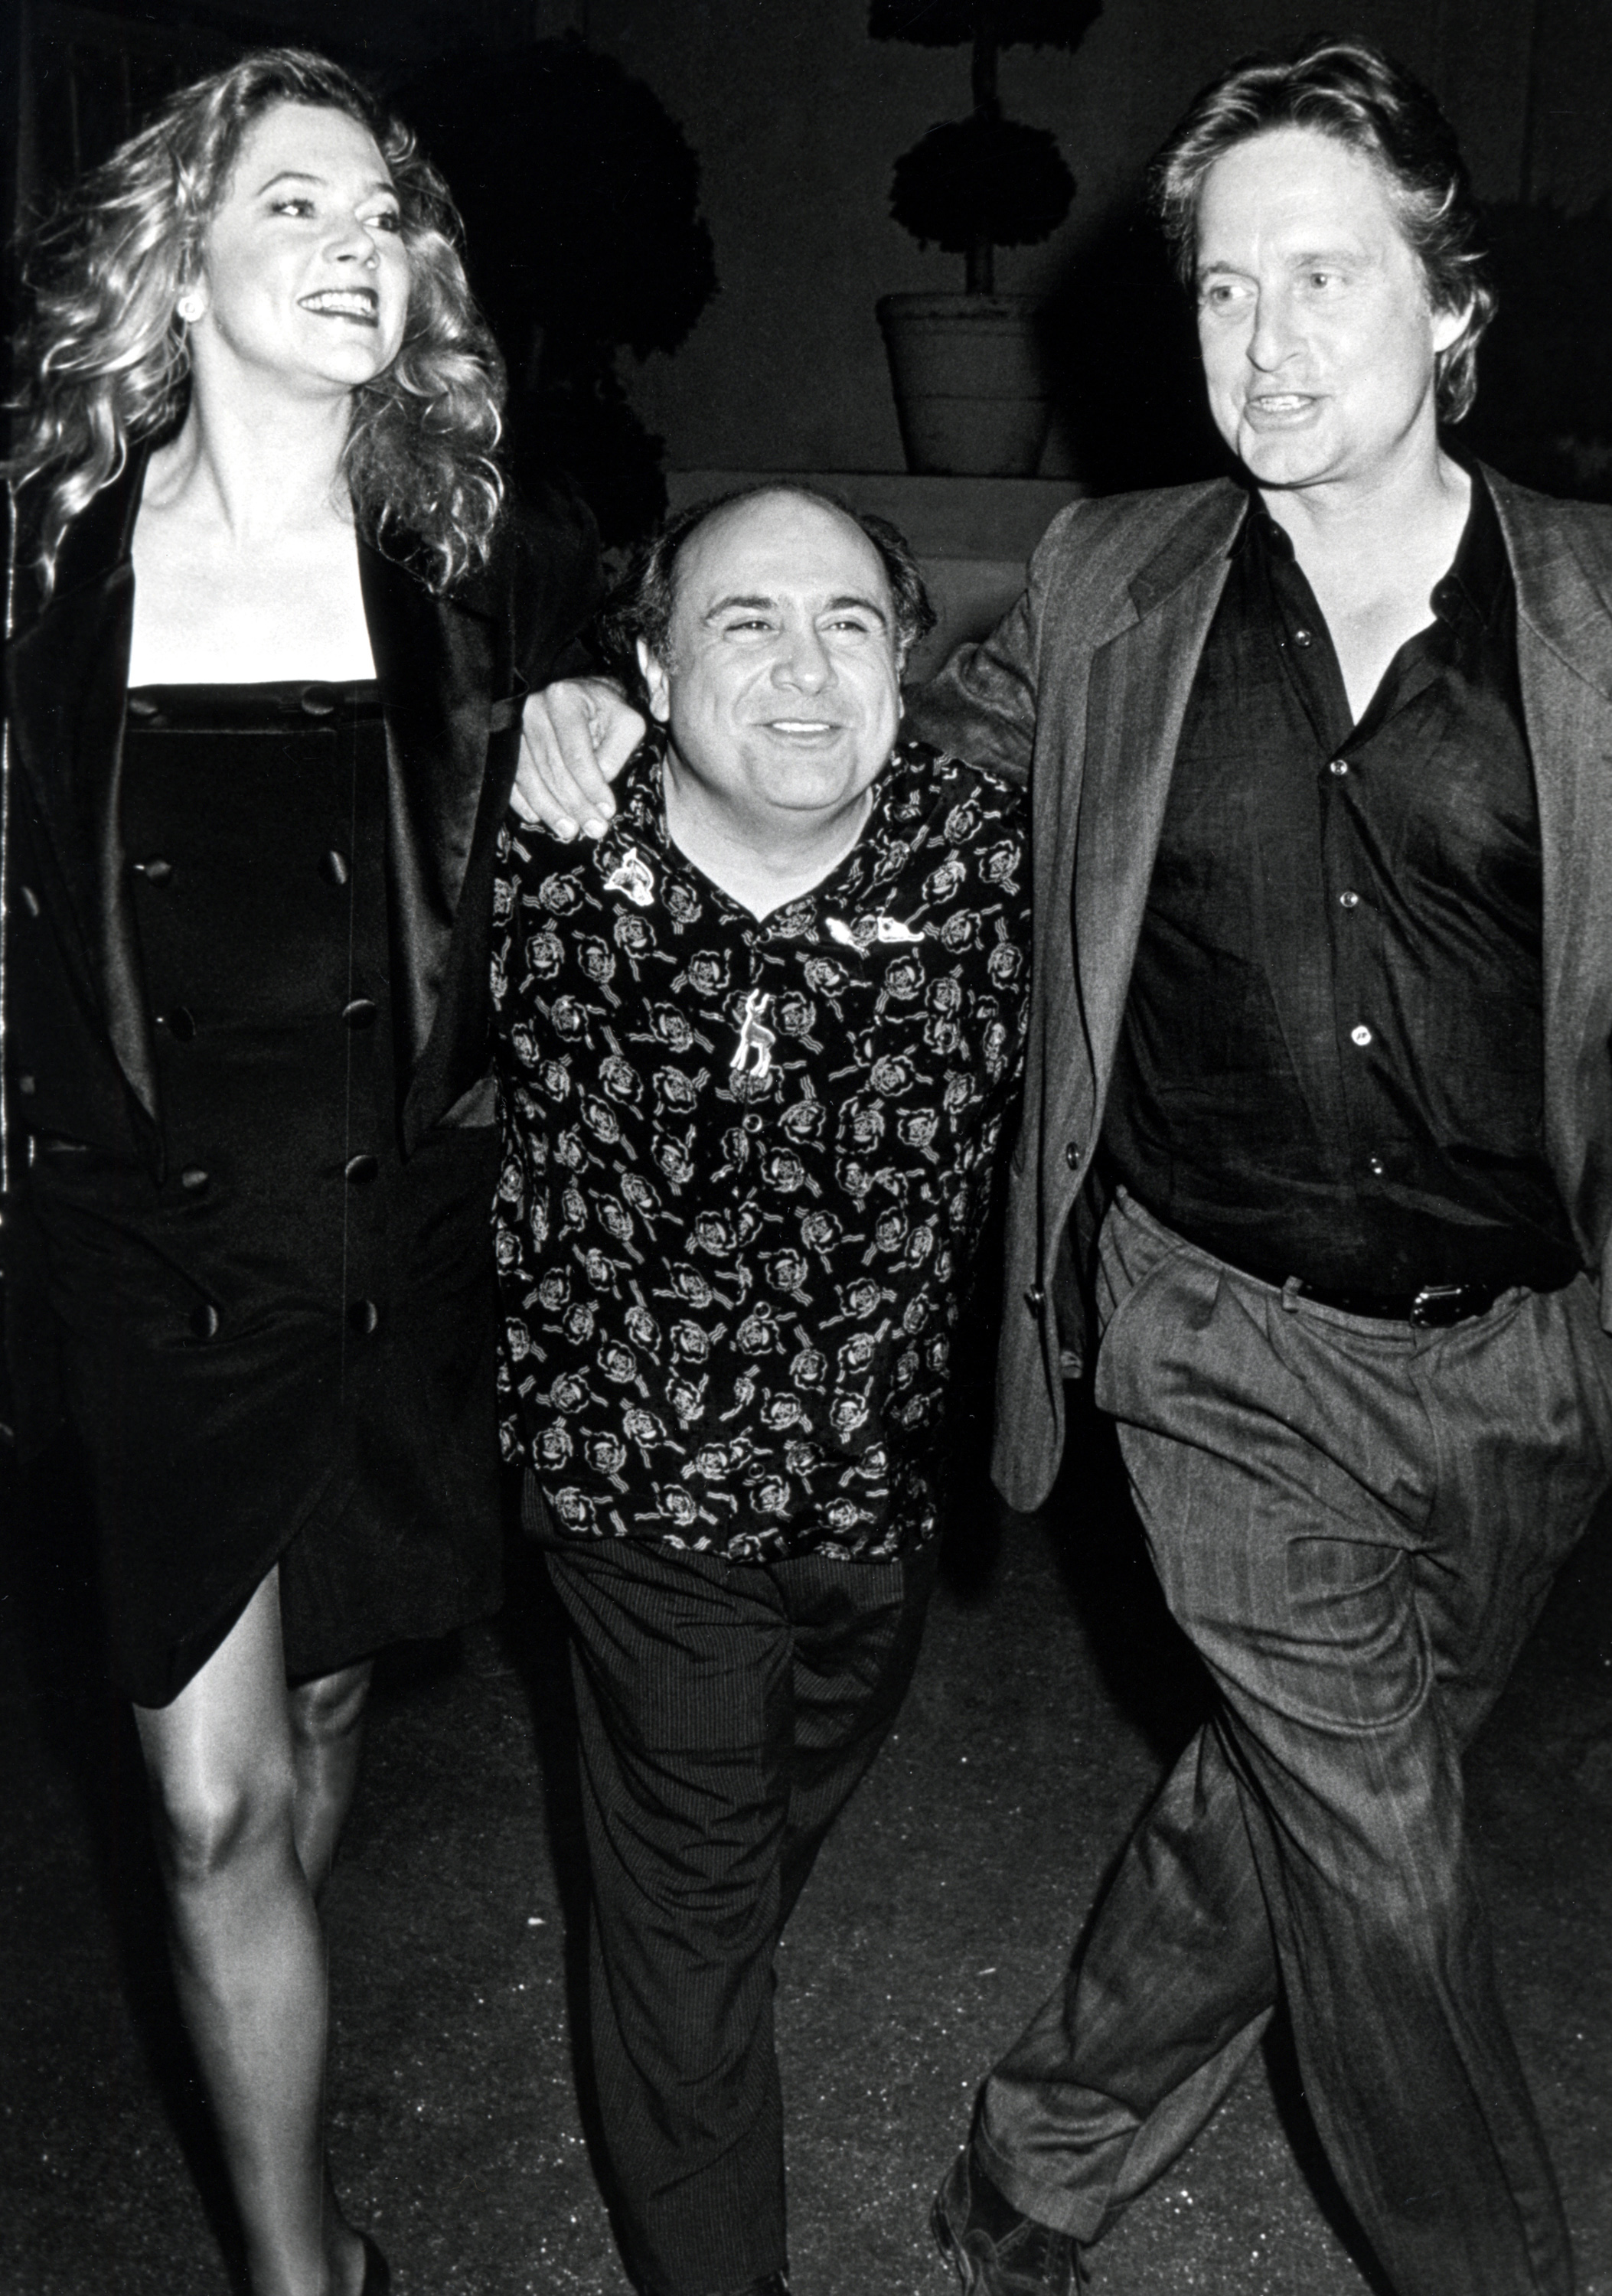 Kathleen Turner, Danny DeVito, and Michael Douglas at the premiere of "The War of the Roses" in Los Angeles, California in 1989 | Source: Getty Images